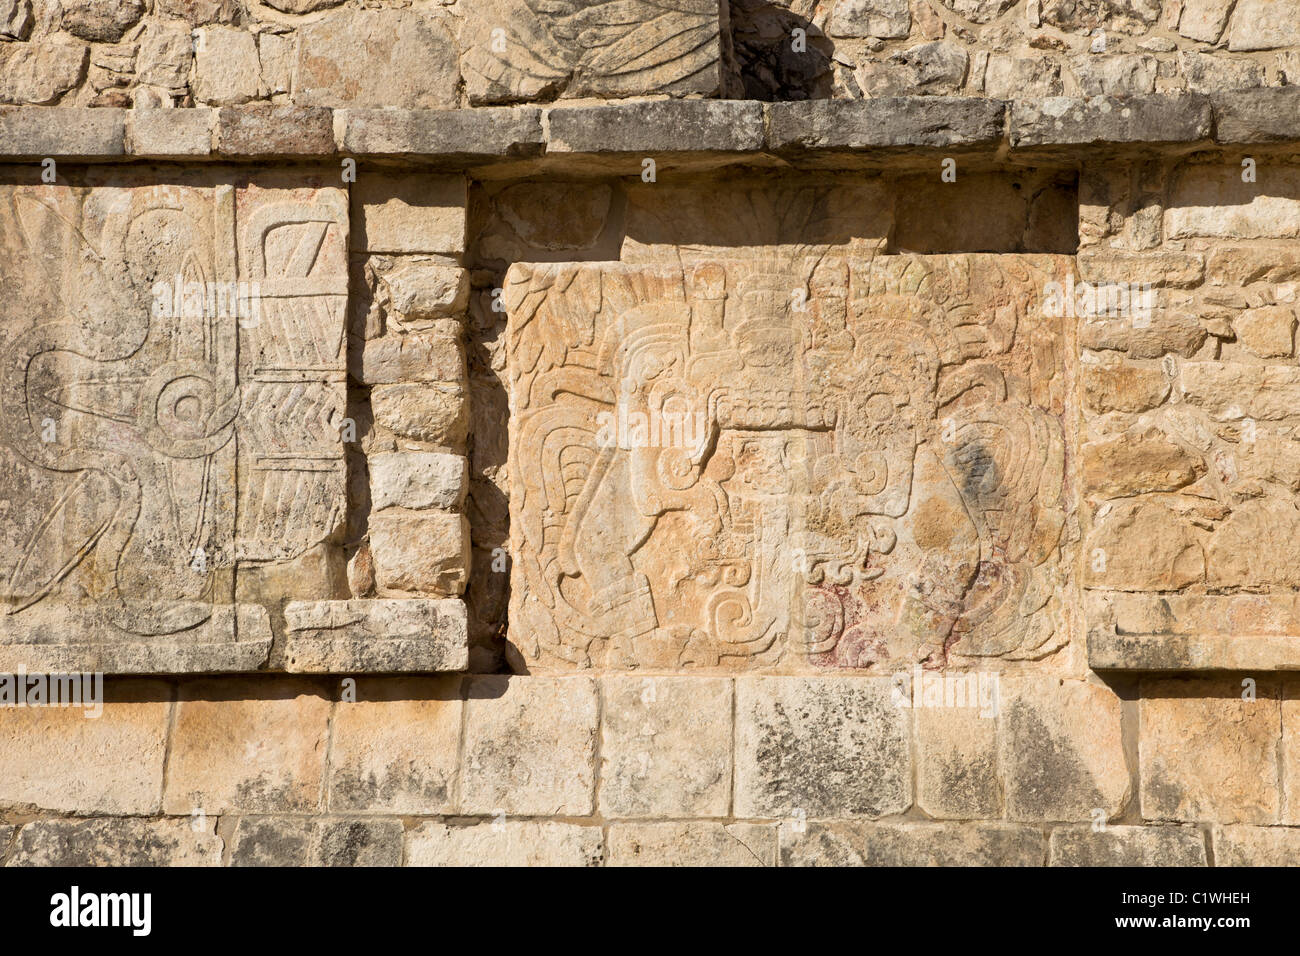 Stone relief of Quetzalcoatl-Kukulkan as the 'Morning Star' on the side panel of the Venus Platform in Chichen Itza, Mexco. Stock Photo